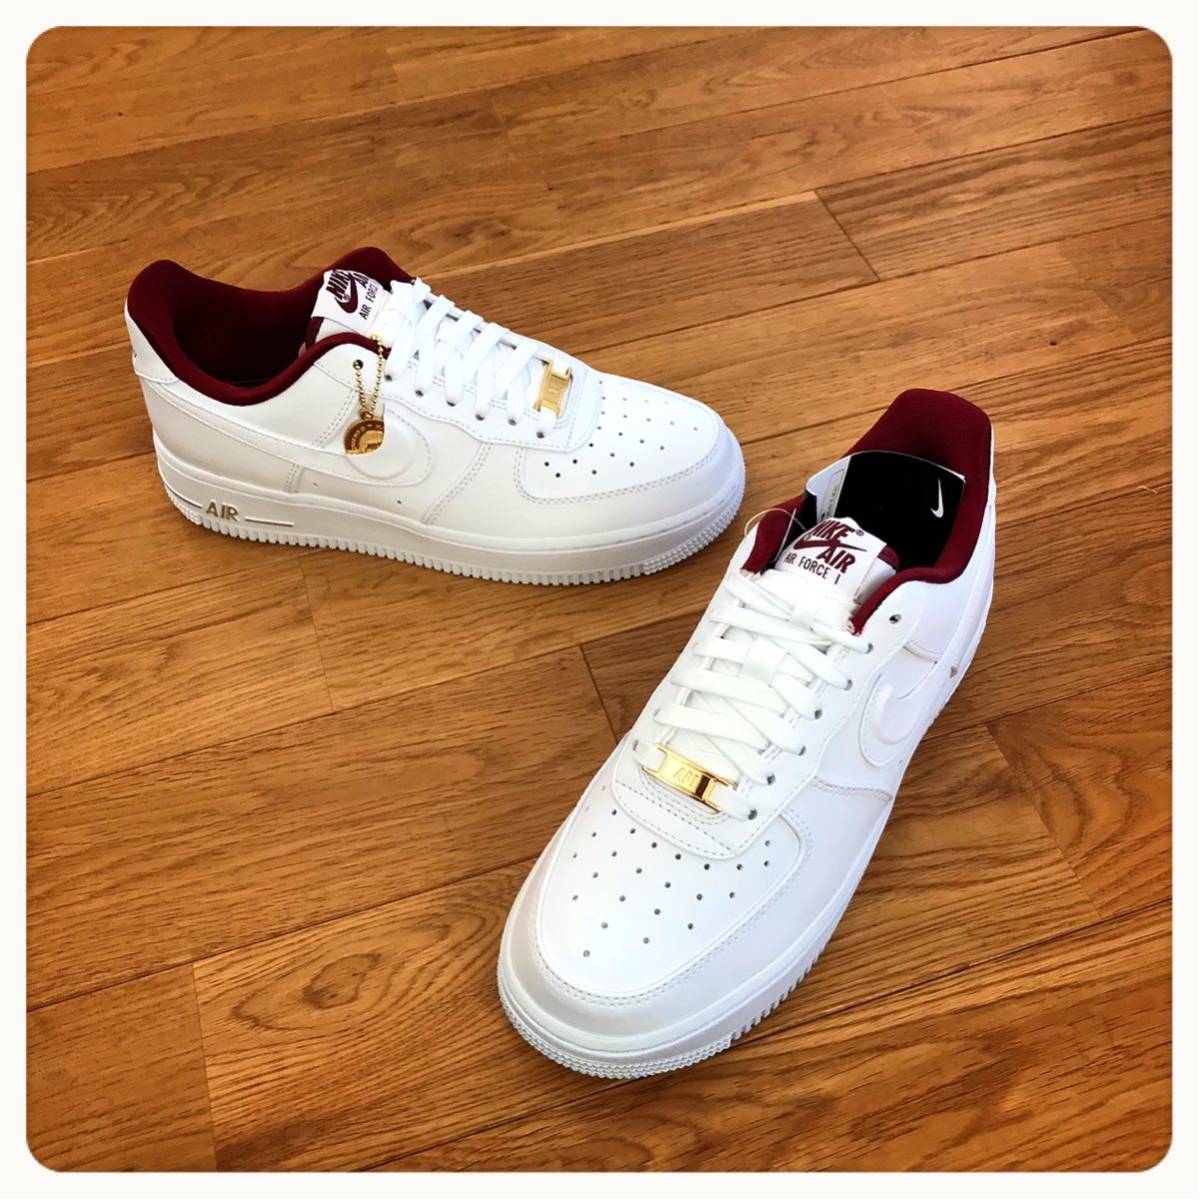 23.0cm Nike WMNS Air Force 1 Low '07 SE Just Do It DV7584-100 NIKE AIR FORCE 1 ペンダント エアフォース 1 コイン 金メダル 限定 23_画像4